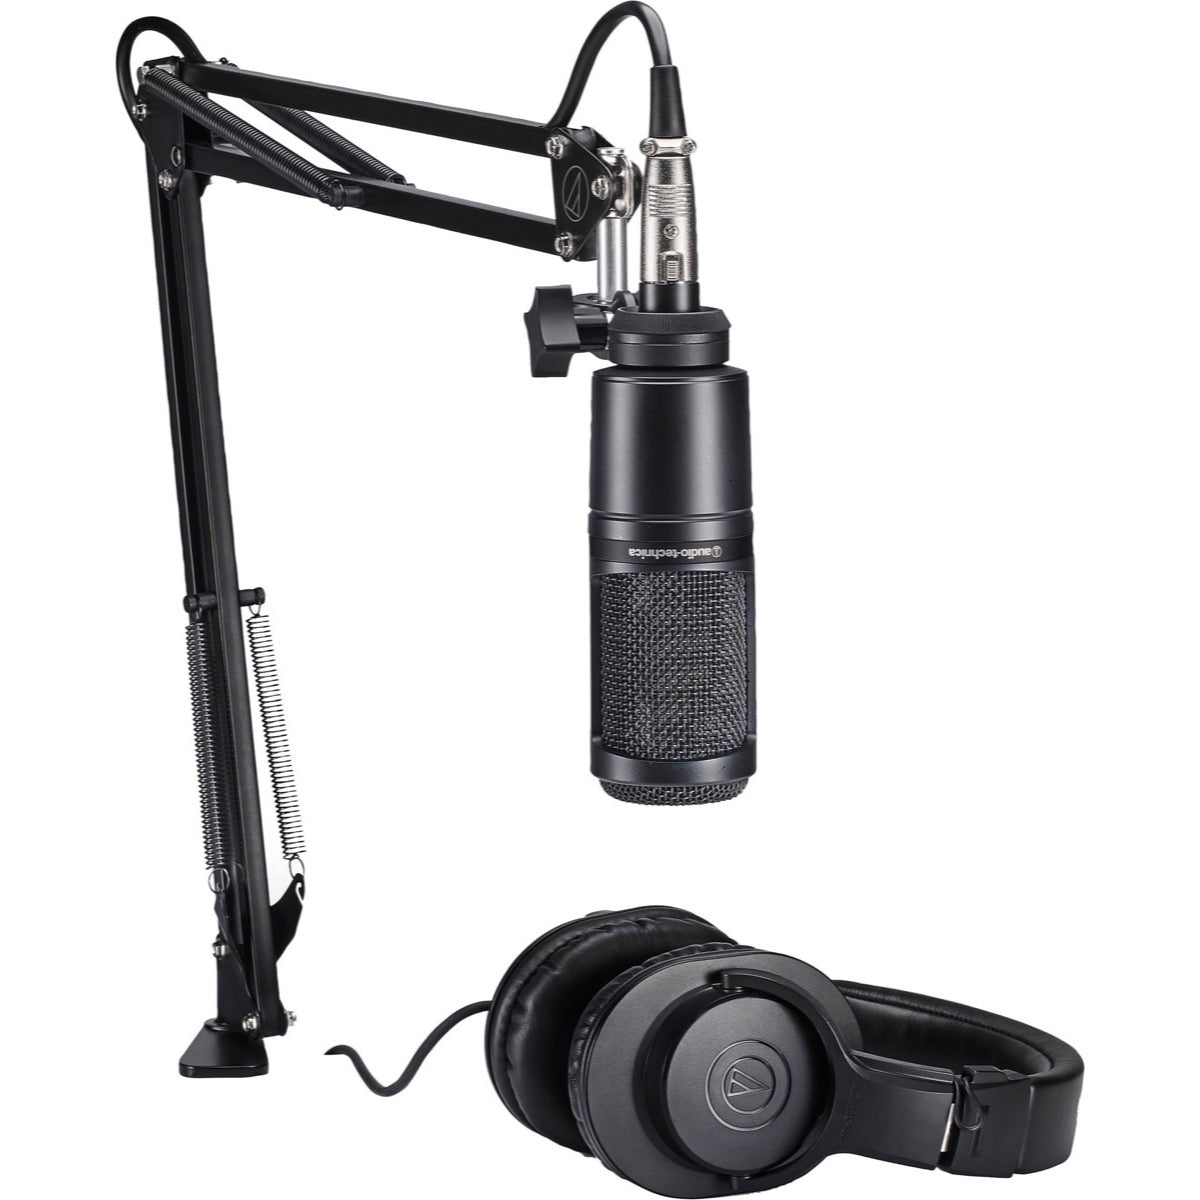 Audio-Technica AT2020 Studio Microphone, Pack with ATH-M20x Headphones and Desktop Boom Arm